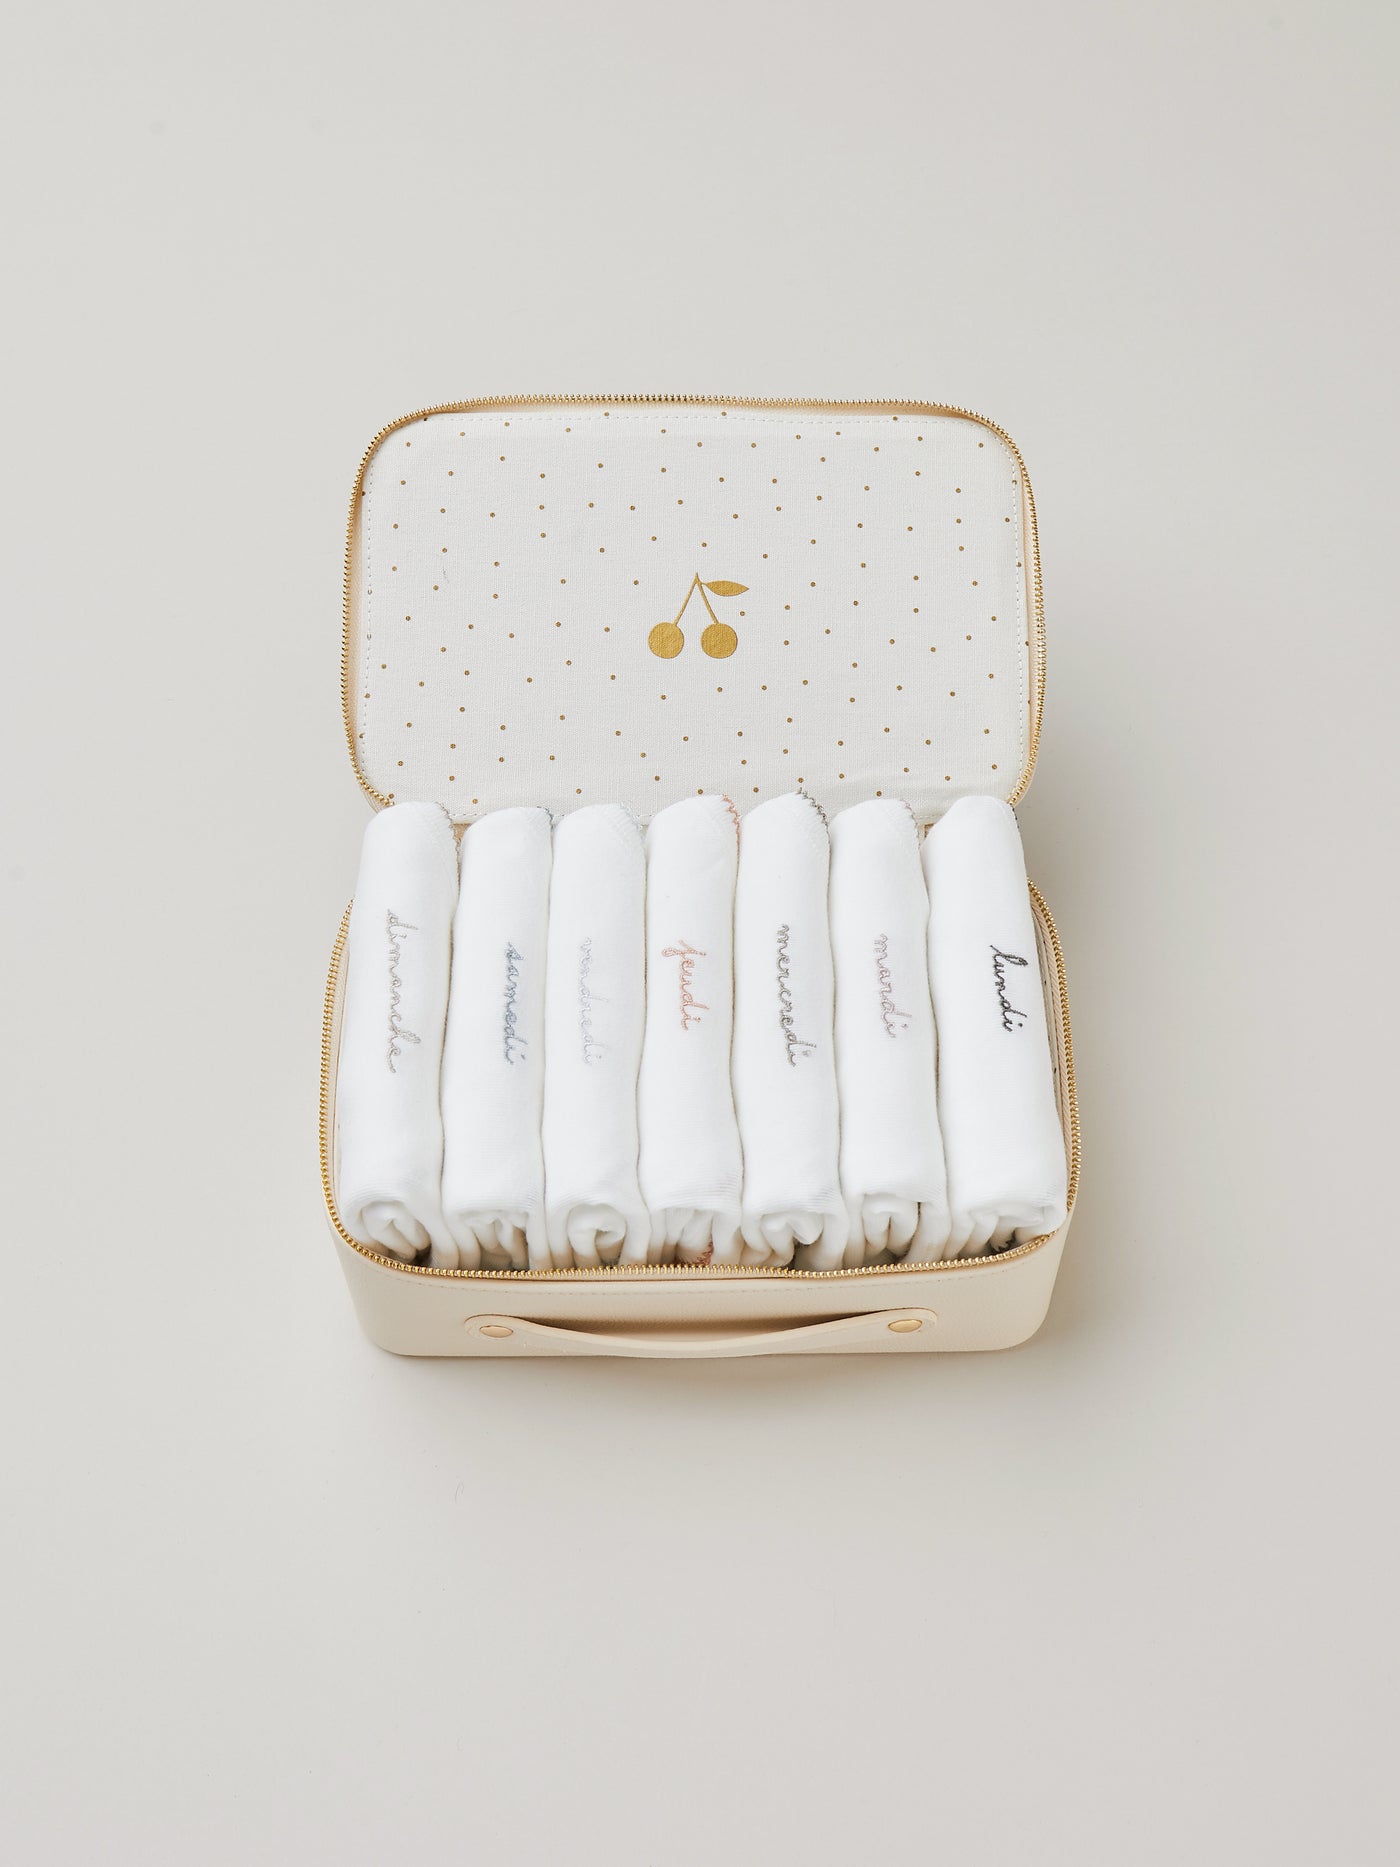 Days-of-the-week suitcase long sleeve